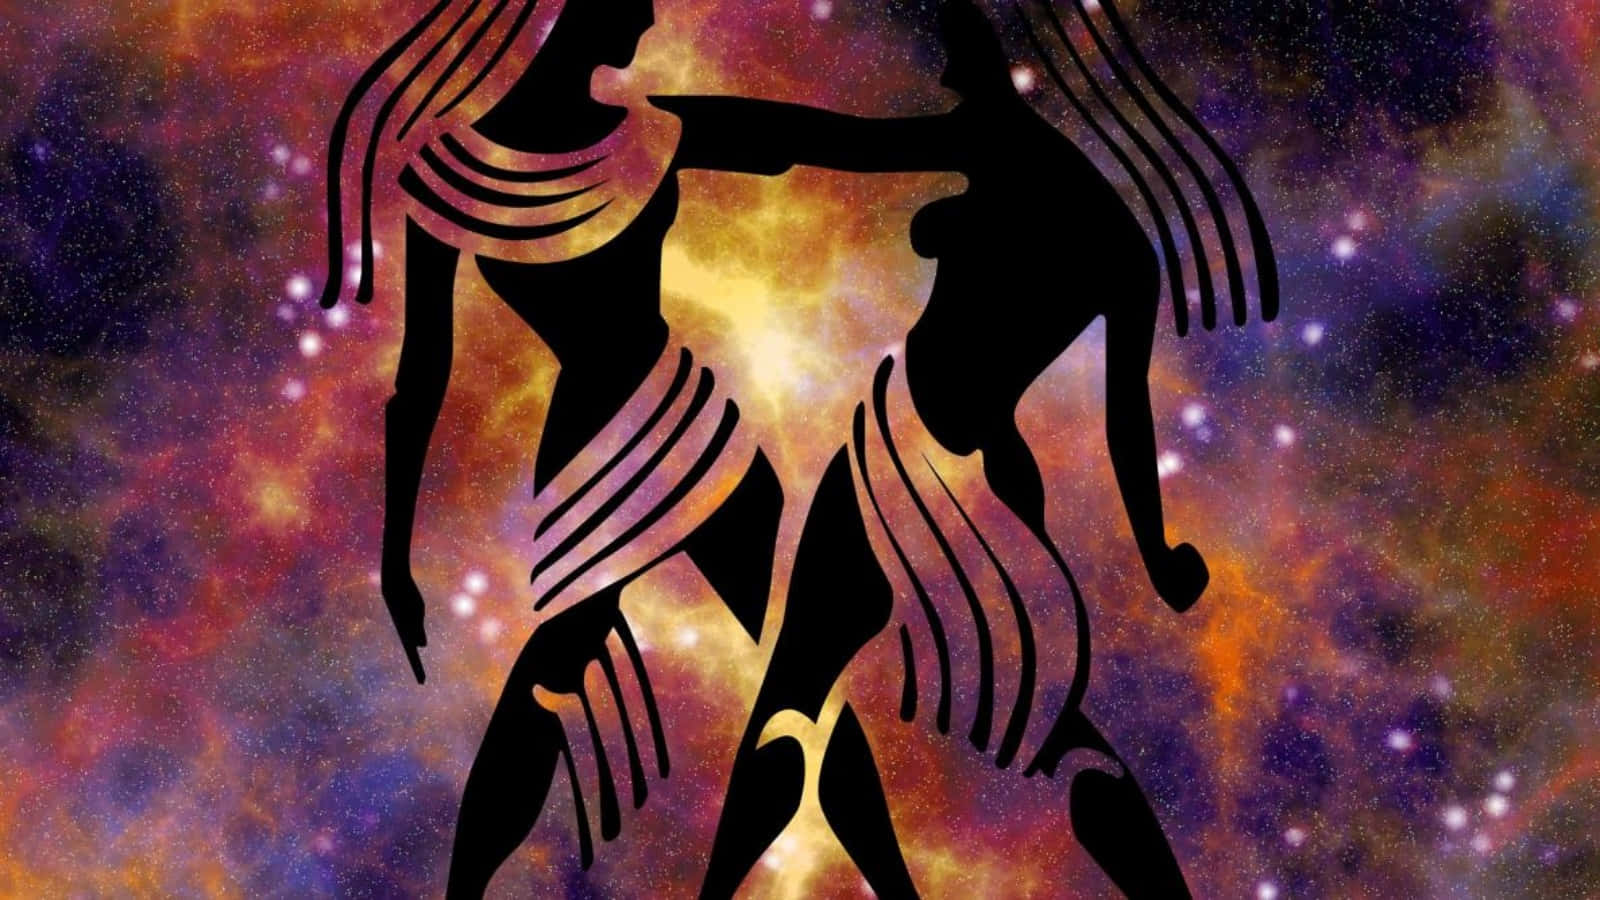 Two Women Are Dancing In The Background Of A Galaxy